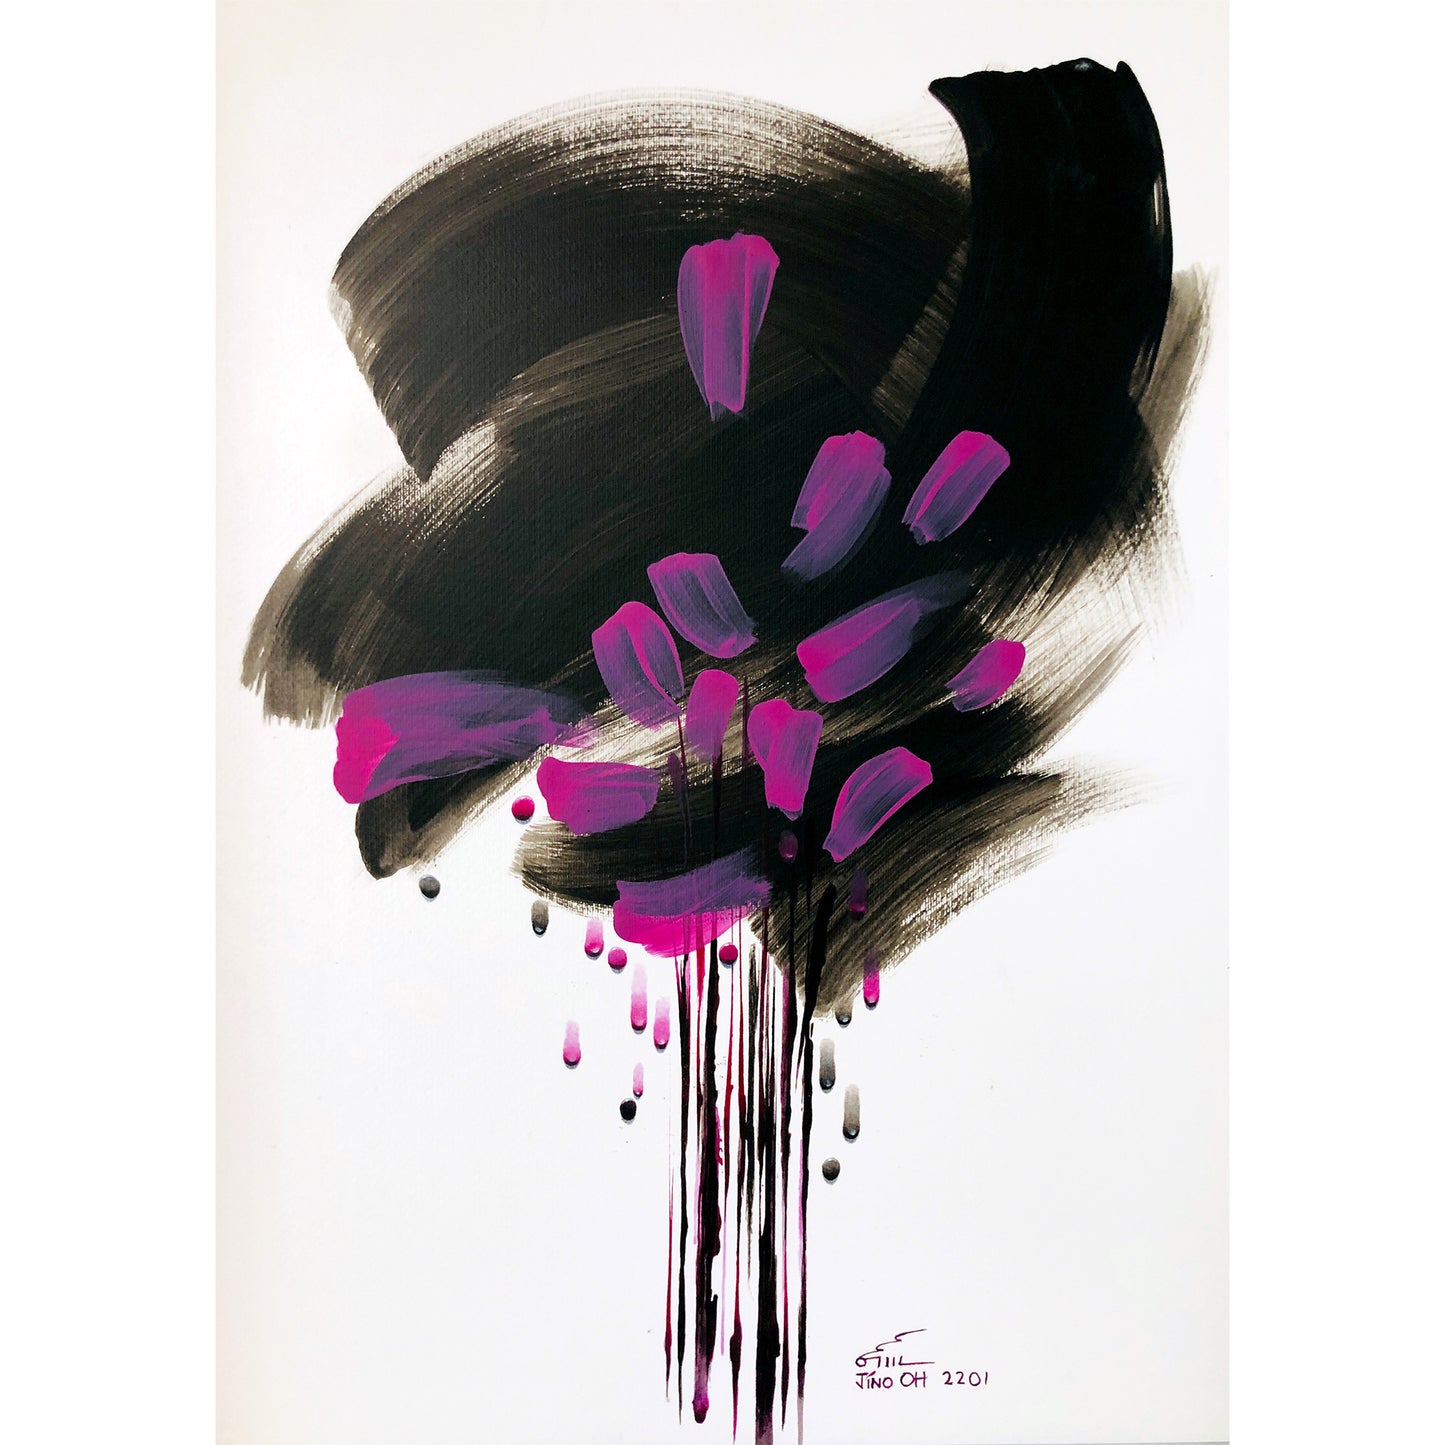 Black and Violet Floral Abstract Art JA053